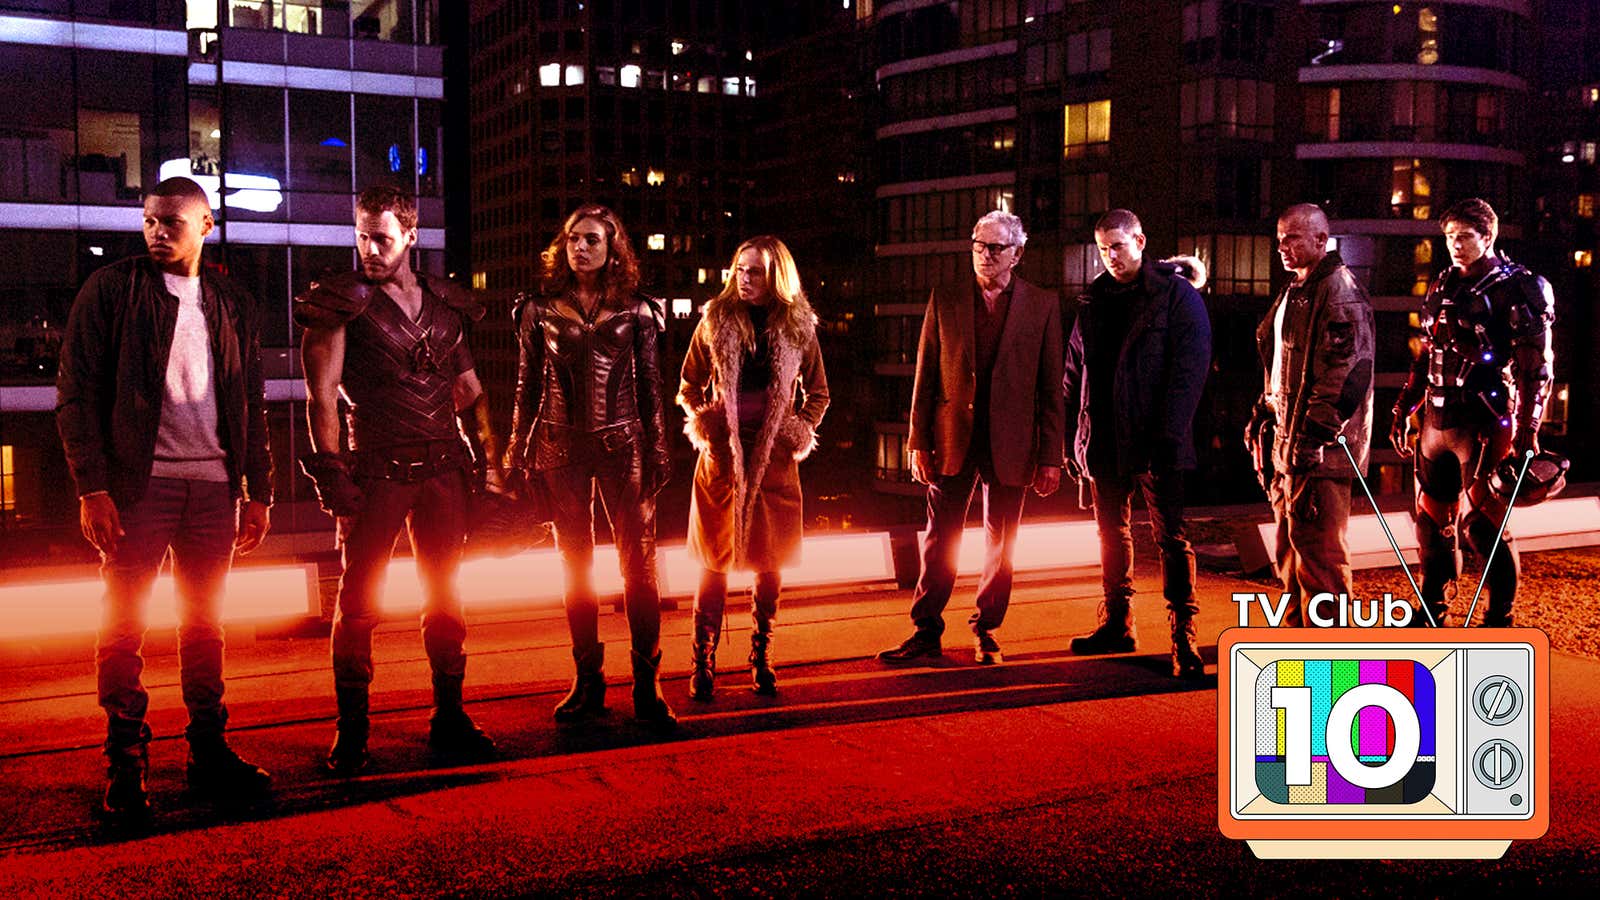 From left: Franz Drameh, Falk Hentschel, Ciara Renee, Caity Lotz, Victor Garber, Wentworth Miller, Dominic Purcell, and Brandon Routh in DC&#39;s Legends Of Tomorrow (Photo: Jeff Weddell/The CW)